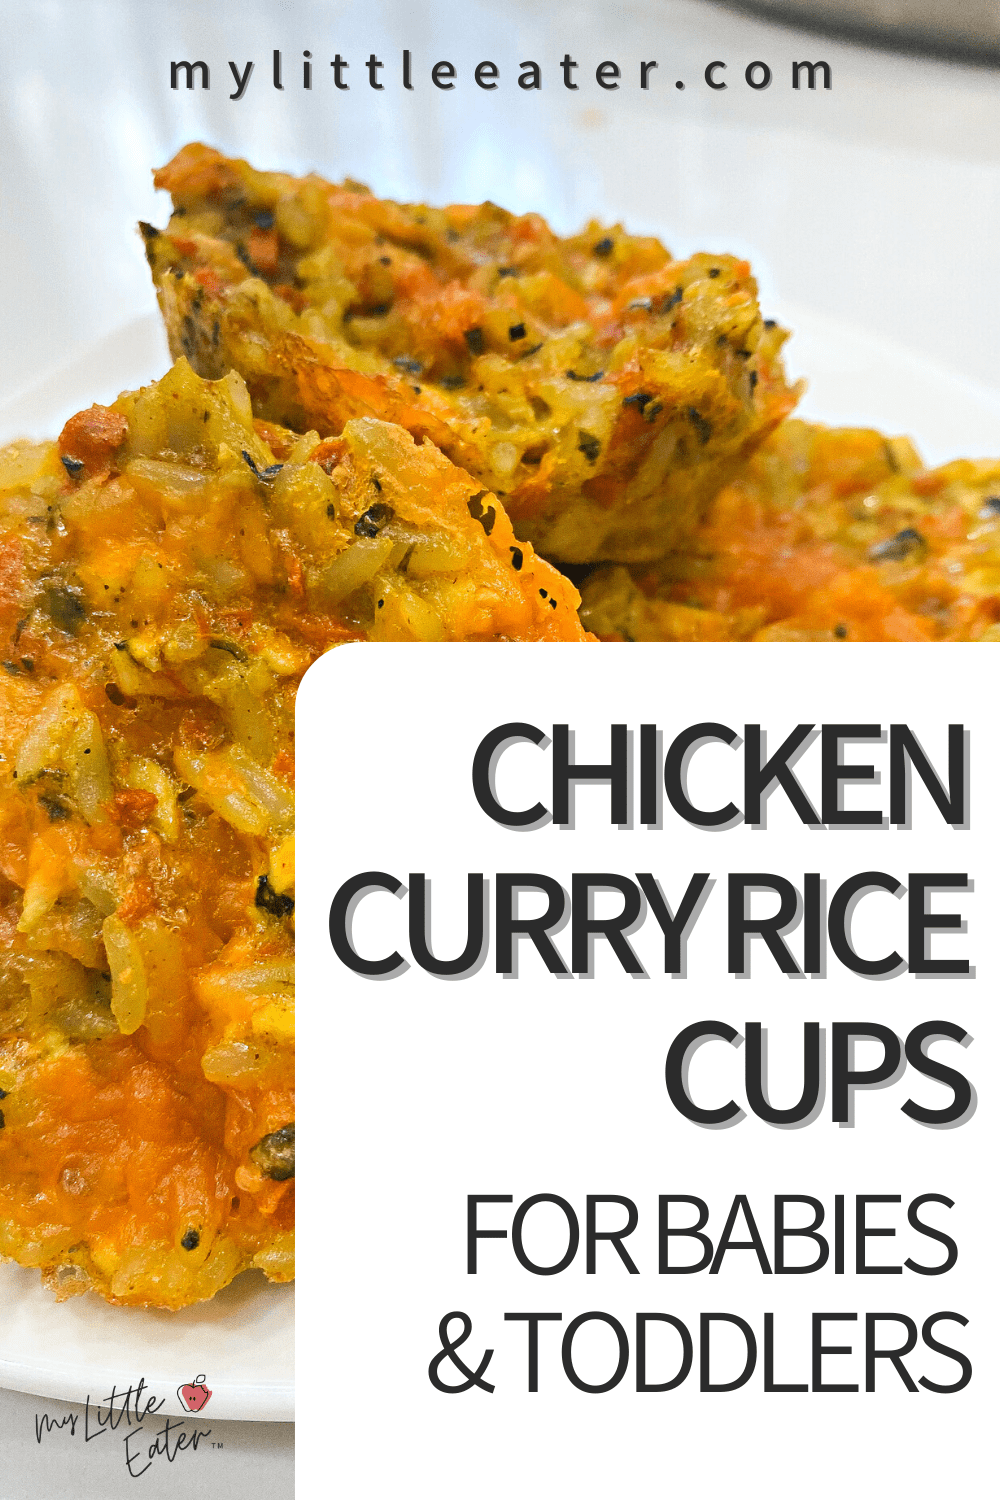 Chicken curry rice cup recipe for babies, toddlers, and picky eaters